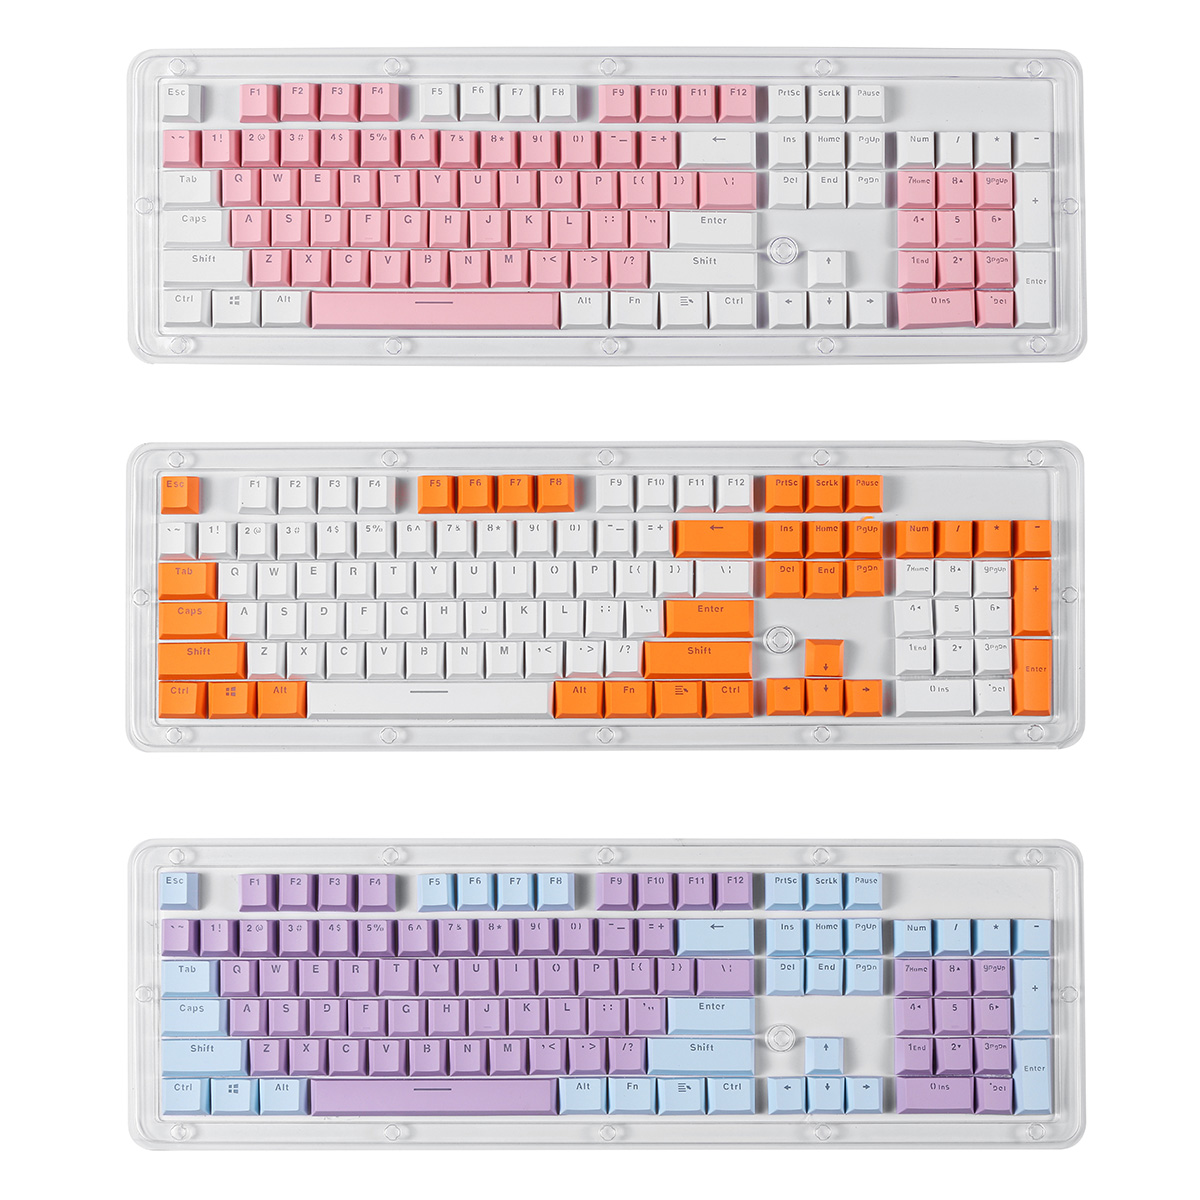 HUACHEN-LS Mechanical Keyboard keycaps 104 Keys Side Printed PBT OEM Height Keycaps for Mechanical Keyboards Color : White